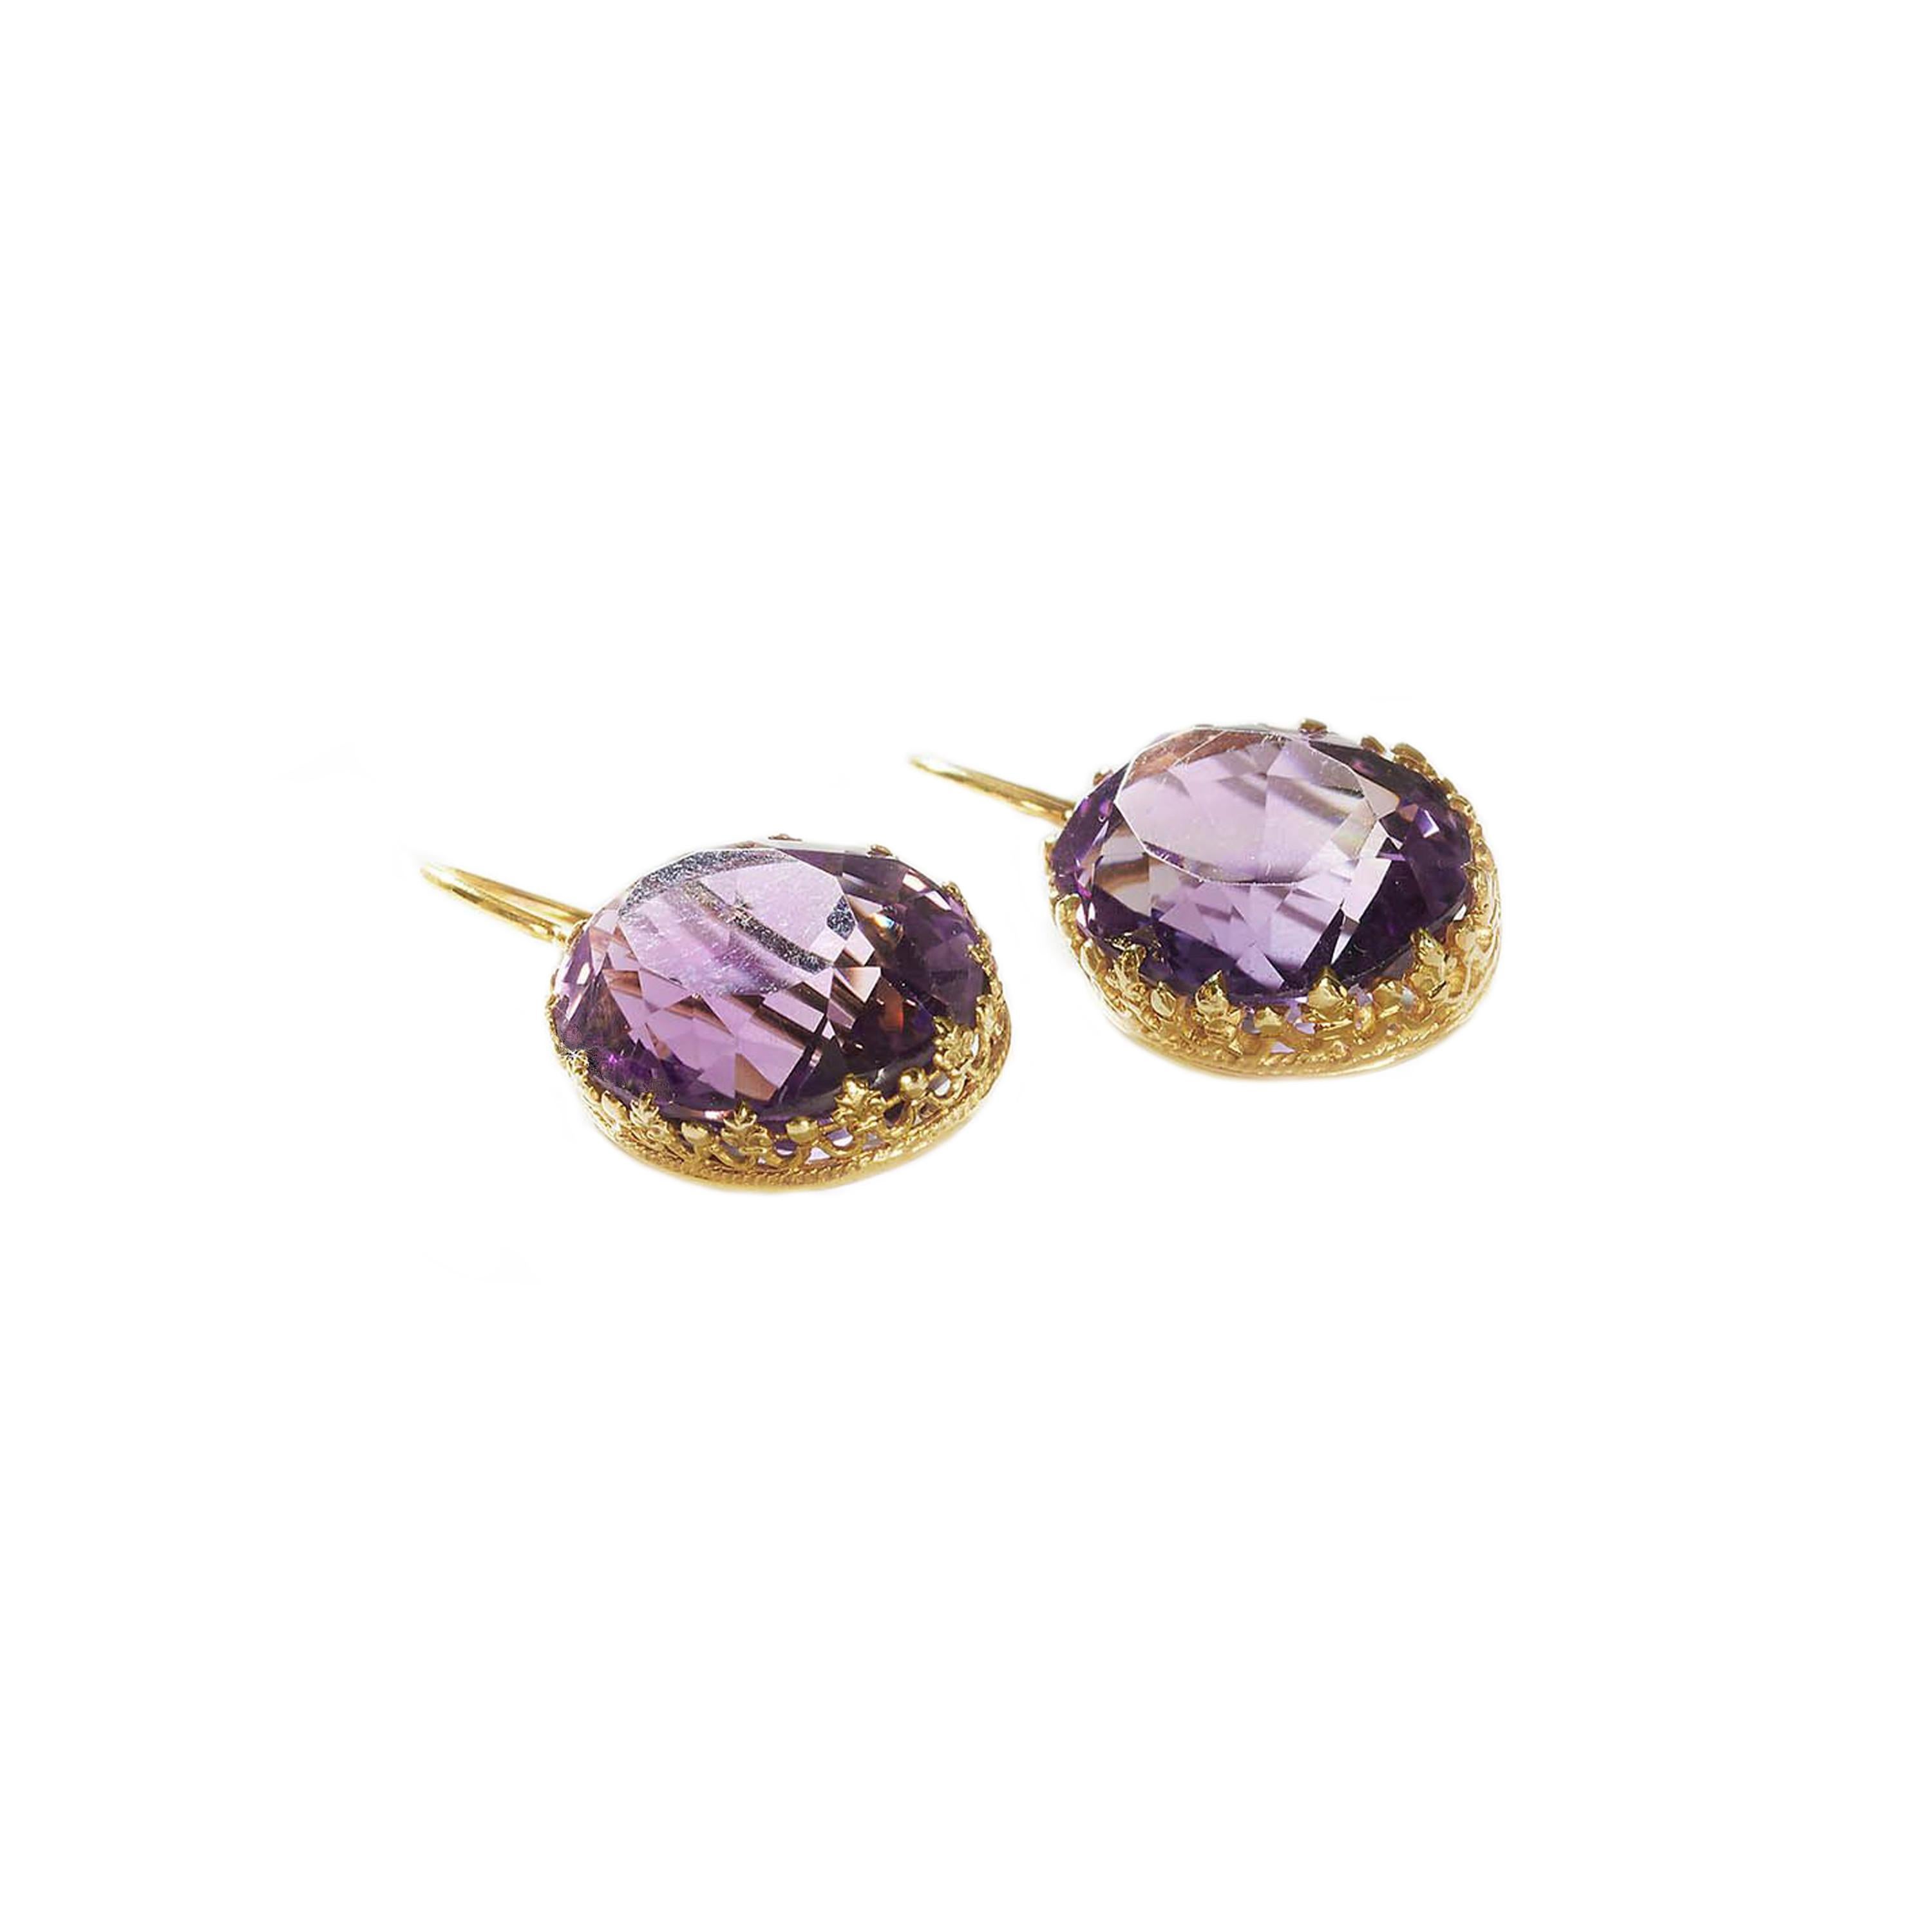 Victorian Antique Amethyst and Gold Drop Earrings, 33.88 Carats, circa 1880